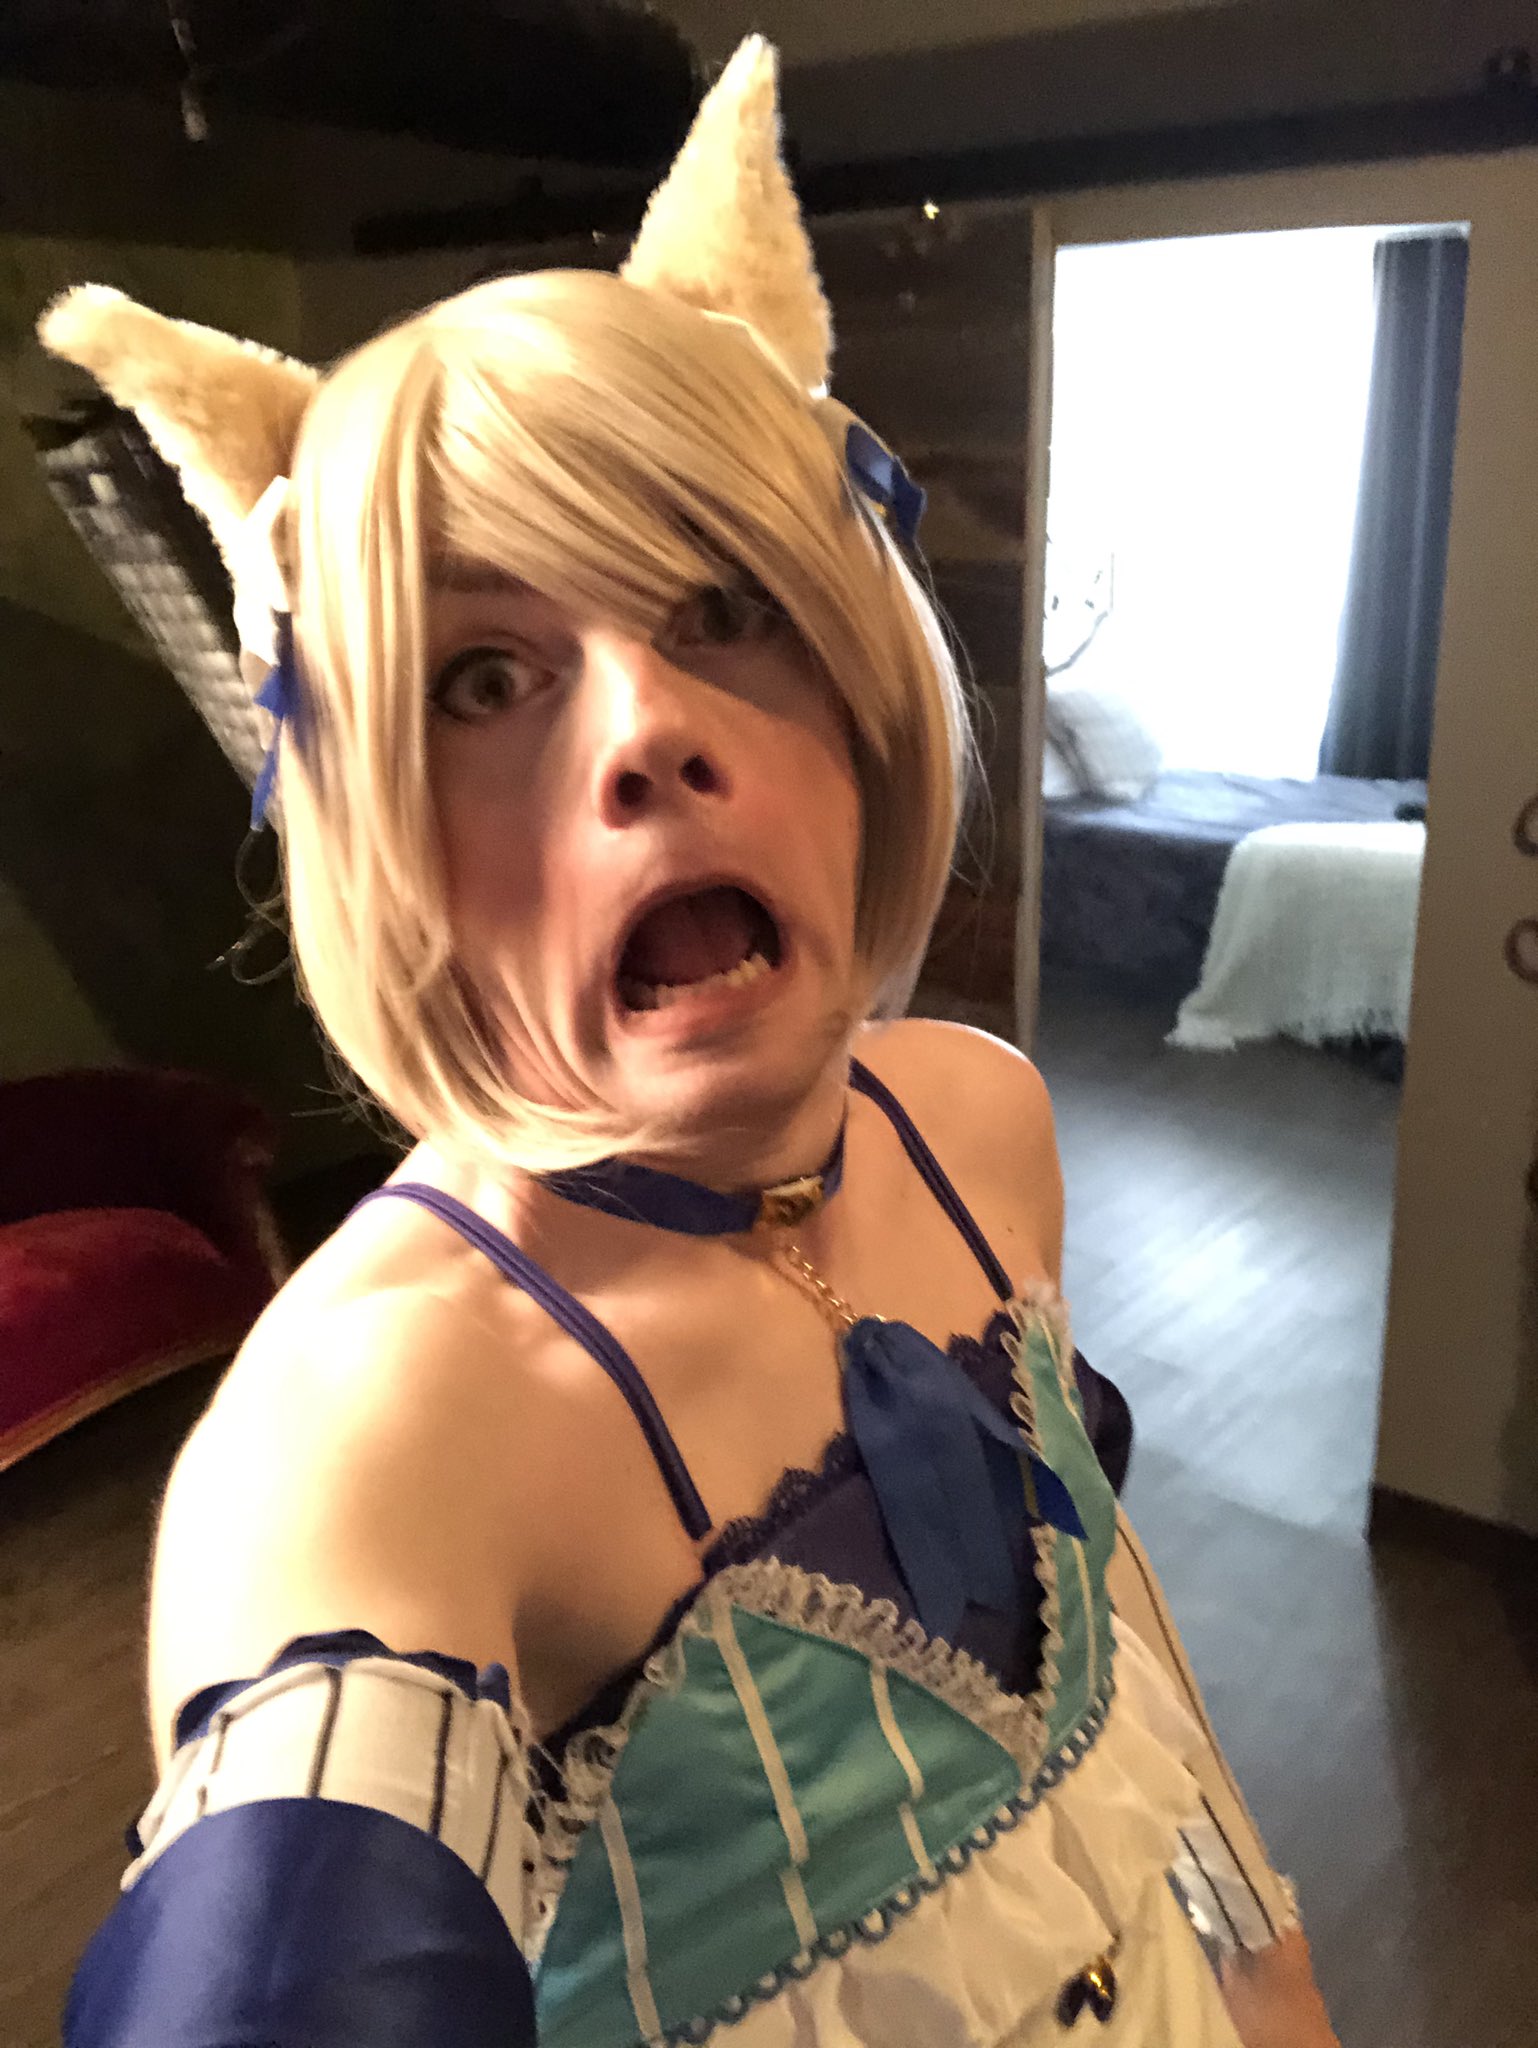 Tfmjonny gg ðº wolfboi vtuber ð on its cosplay photoshoot day and felix is back twitch subathon goals plete cant wait to share these photos with my subscribers âï httpstcoabjtdaq